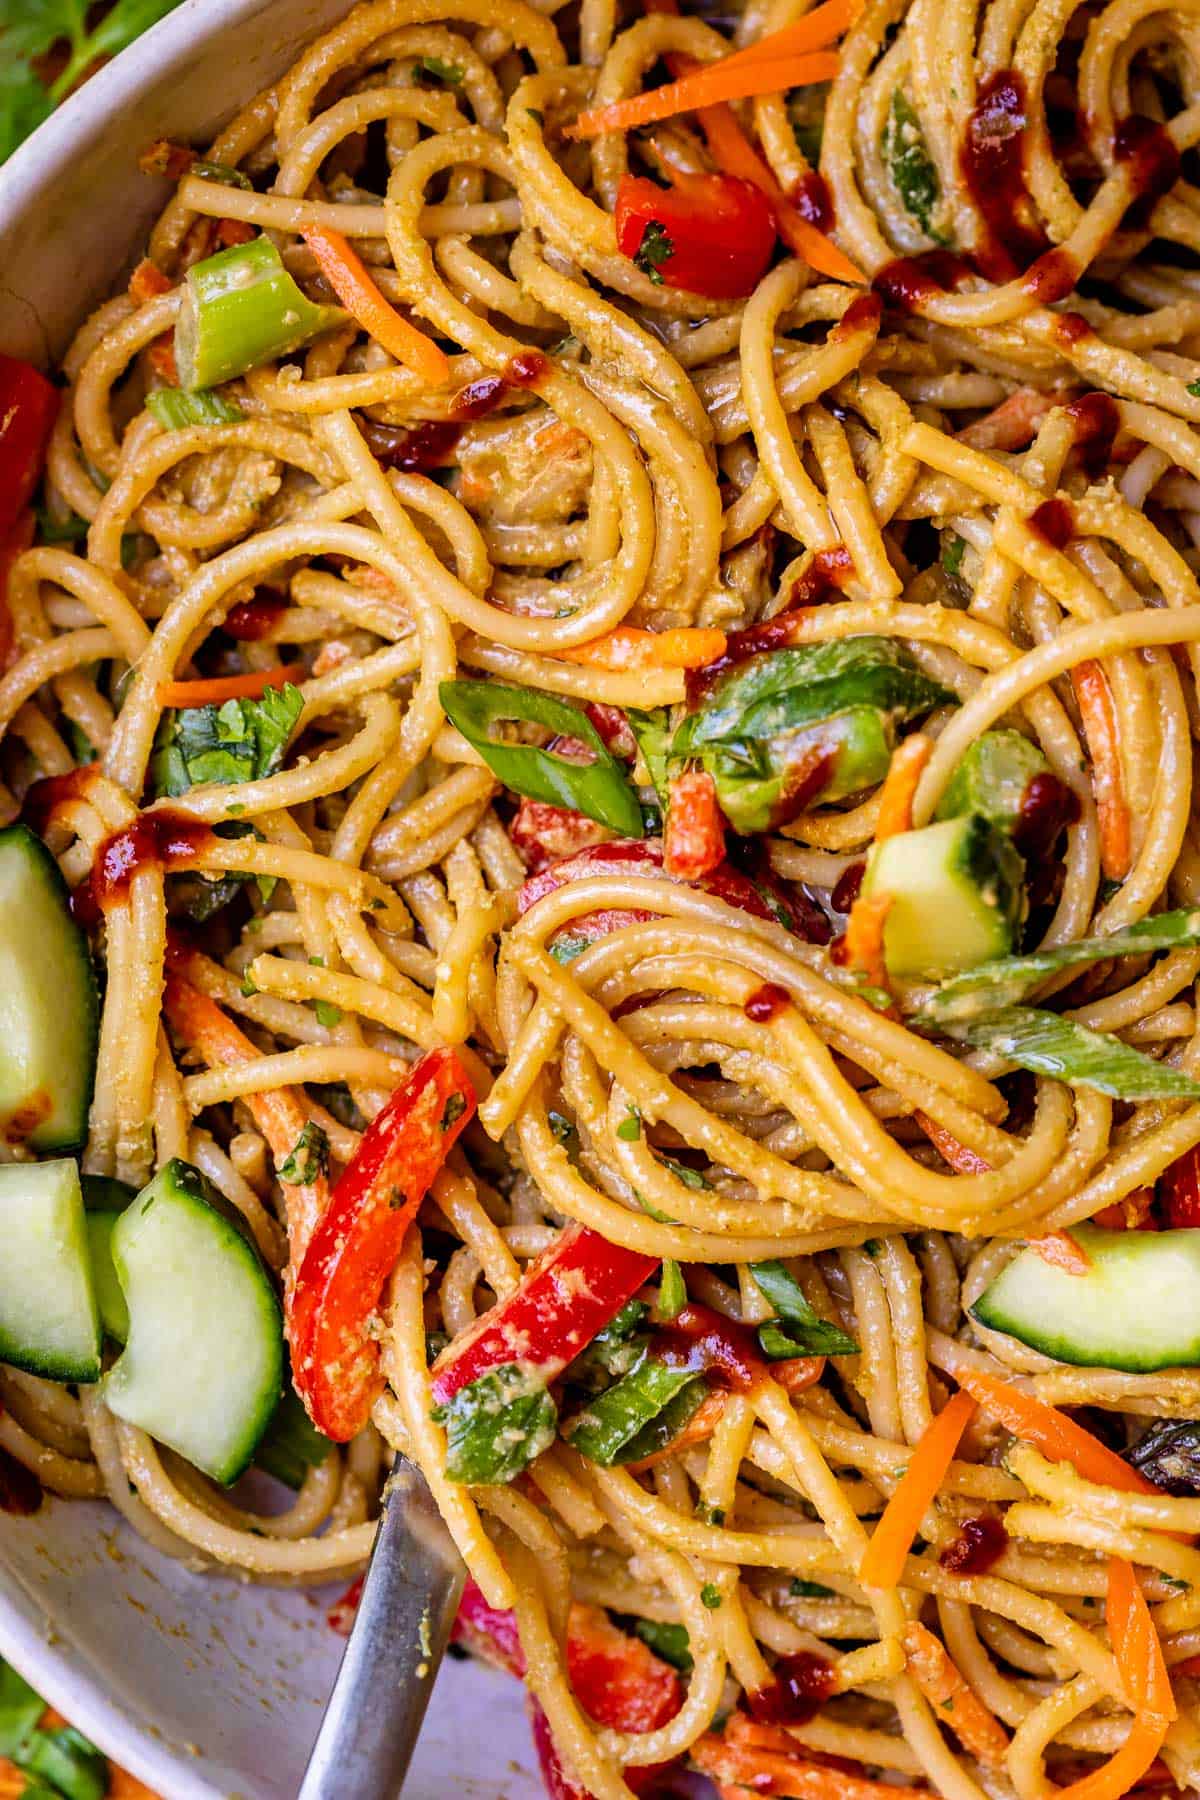 sesame peanut noodles swirled with vegetables in a large ceramic bowl.